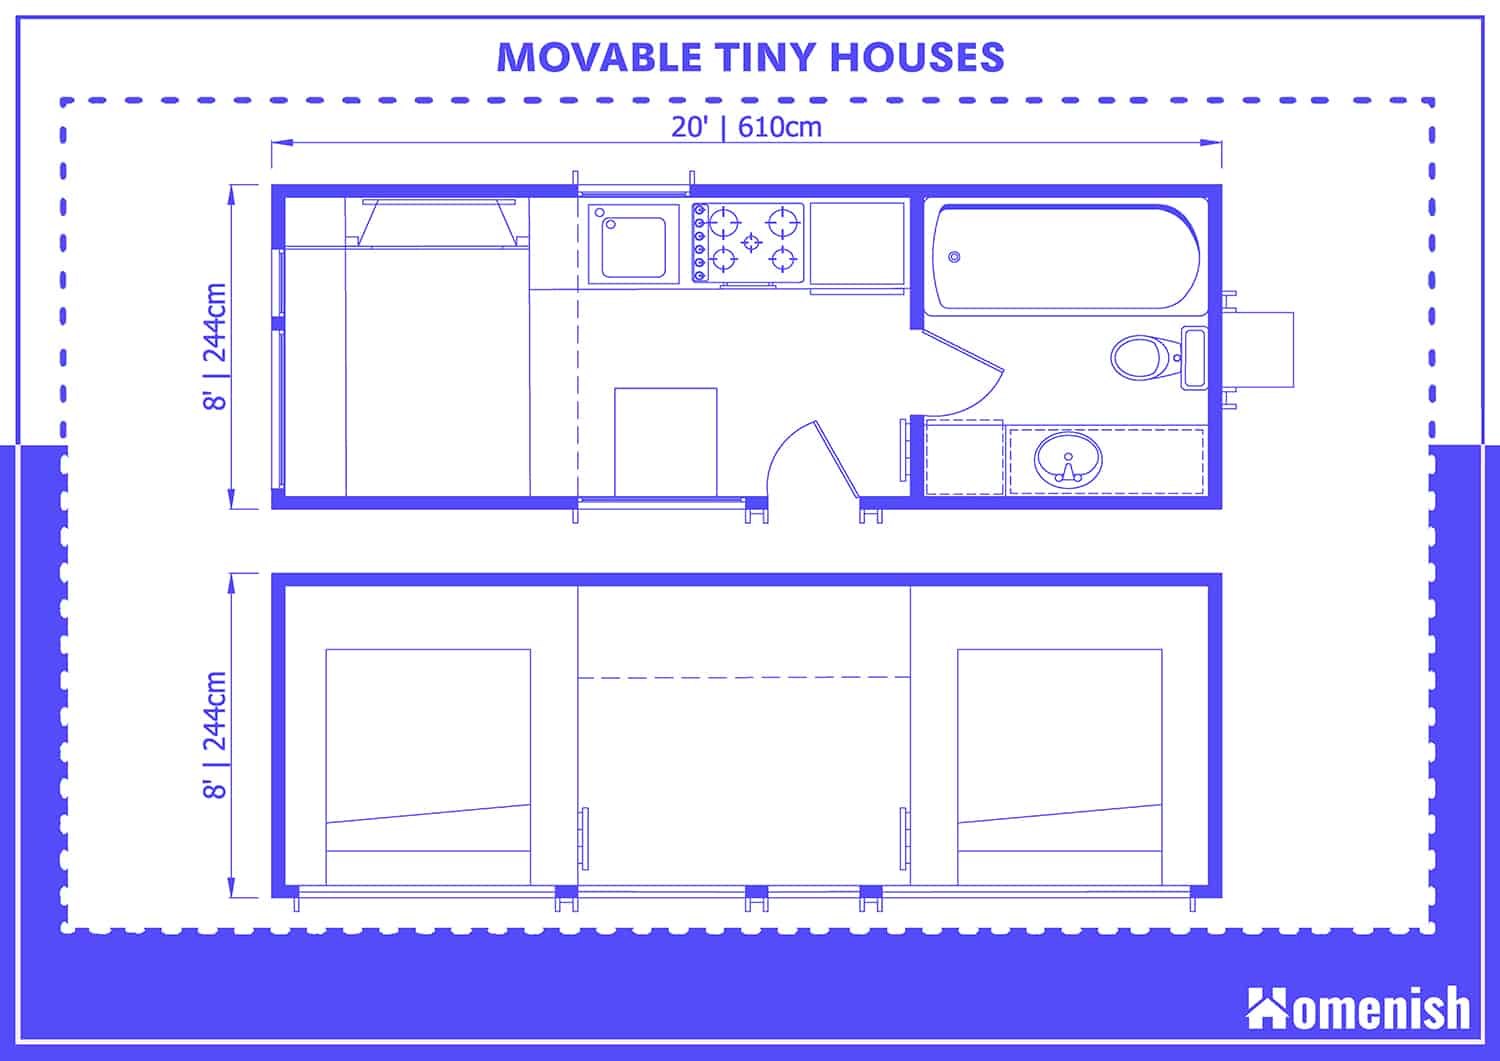 Movable Tiny House Dimensions